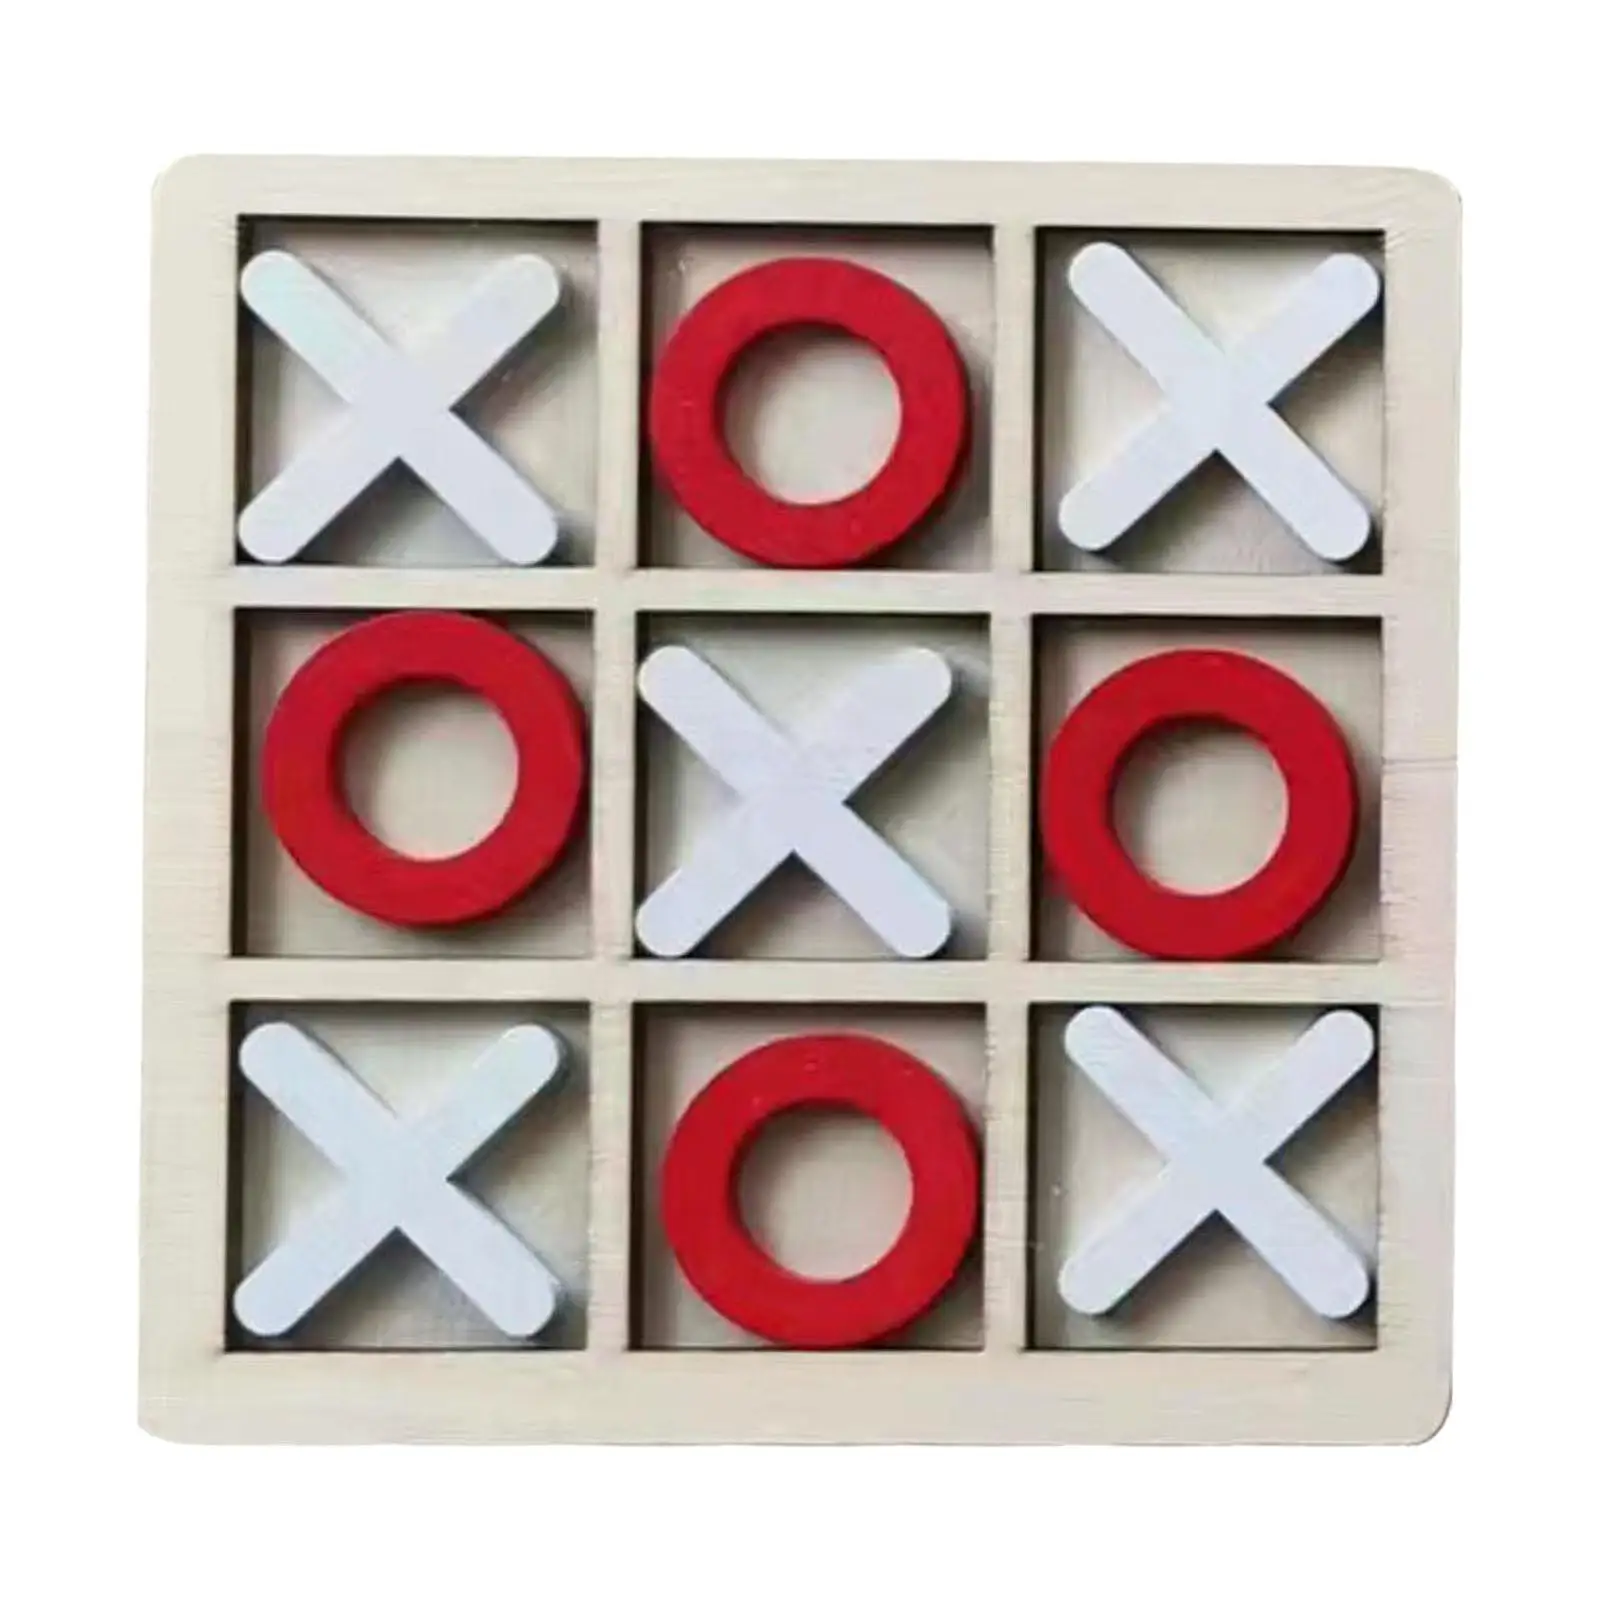 

Wooden Board Tic TAC Toe Game Family Children Puzzle Game Tabletop Blocks Xoxo Chess Board Game for Party Favors Kids Adults